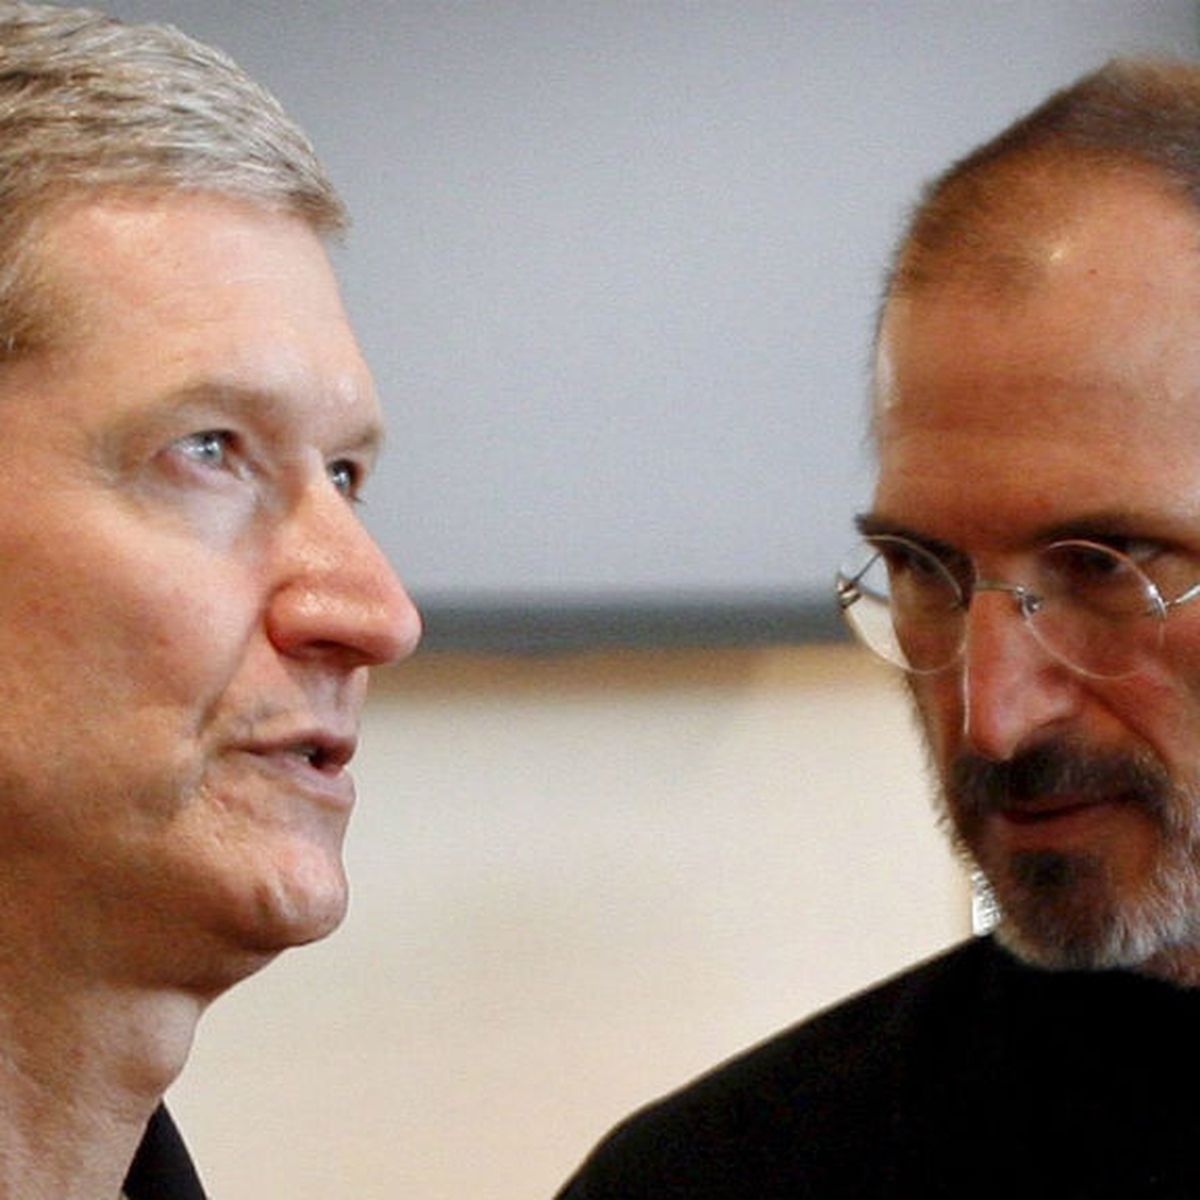 Apple CEO Tim Cook 'offered liver' to Steve Jobs - 9News